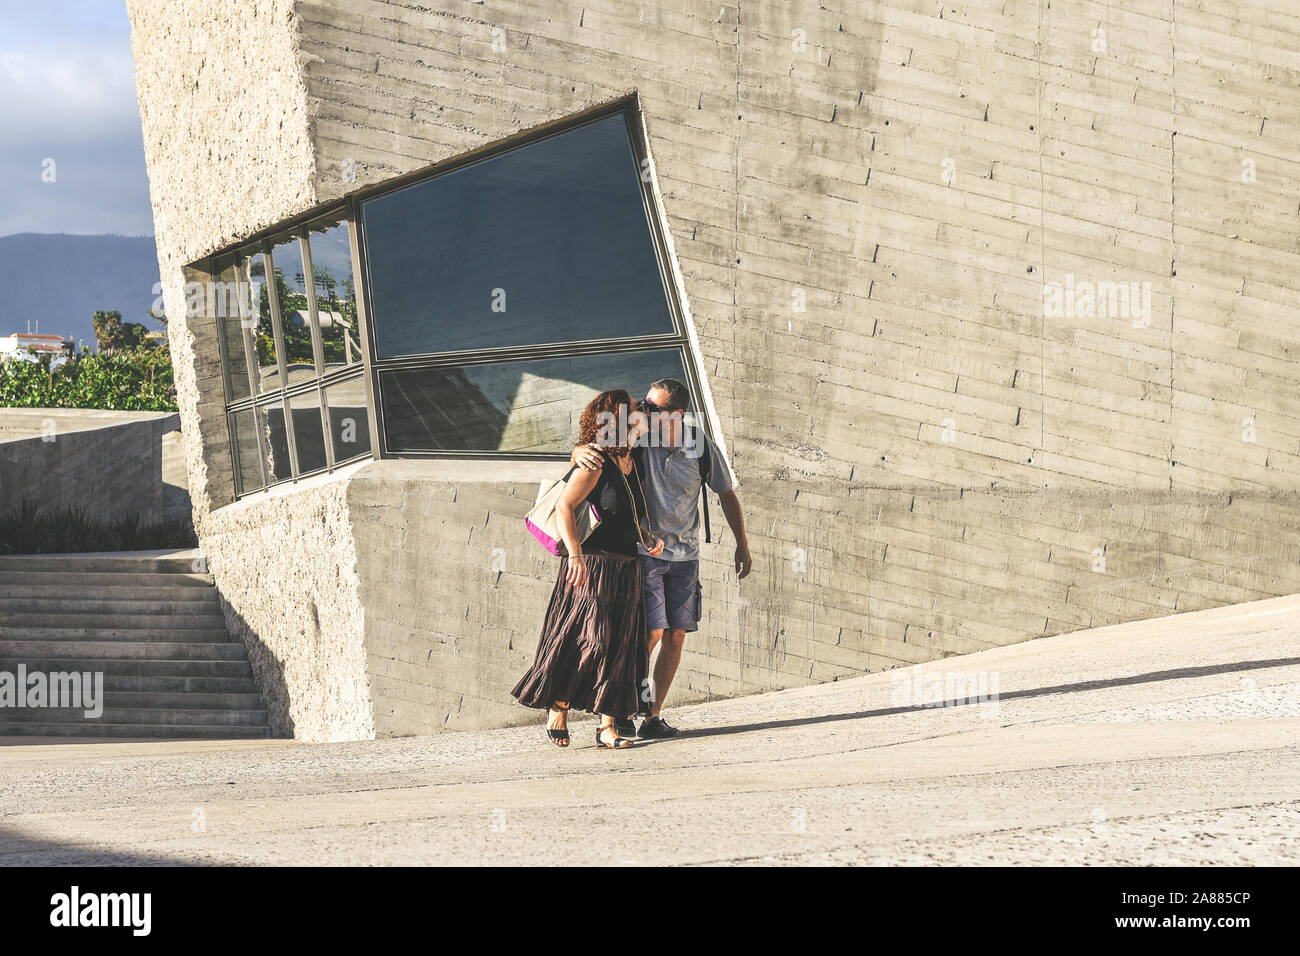 Couple of tourists is kissing in the city discovering new places. Man and woman walks in a modern urban context. People having fun in a touristic city Stock Photo